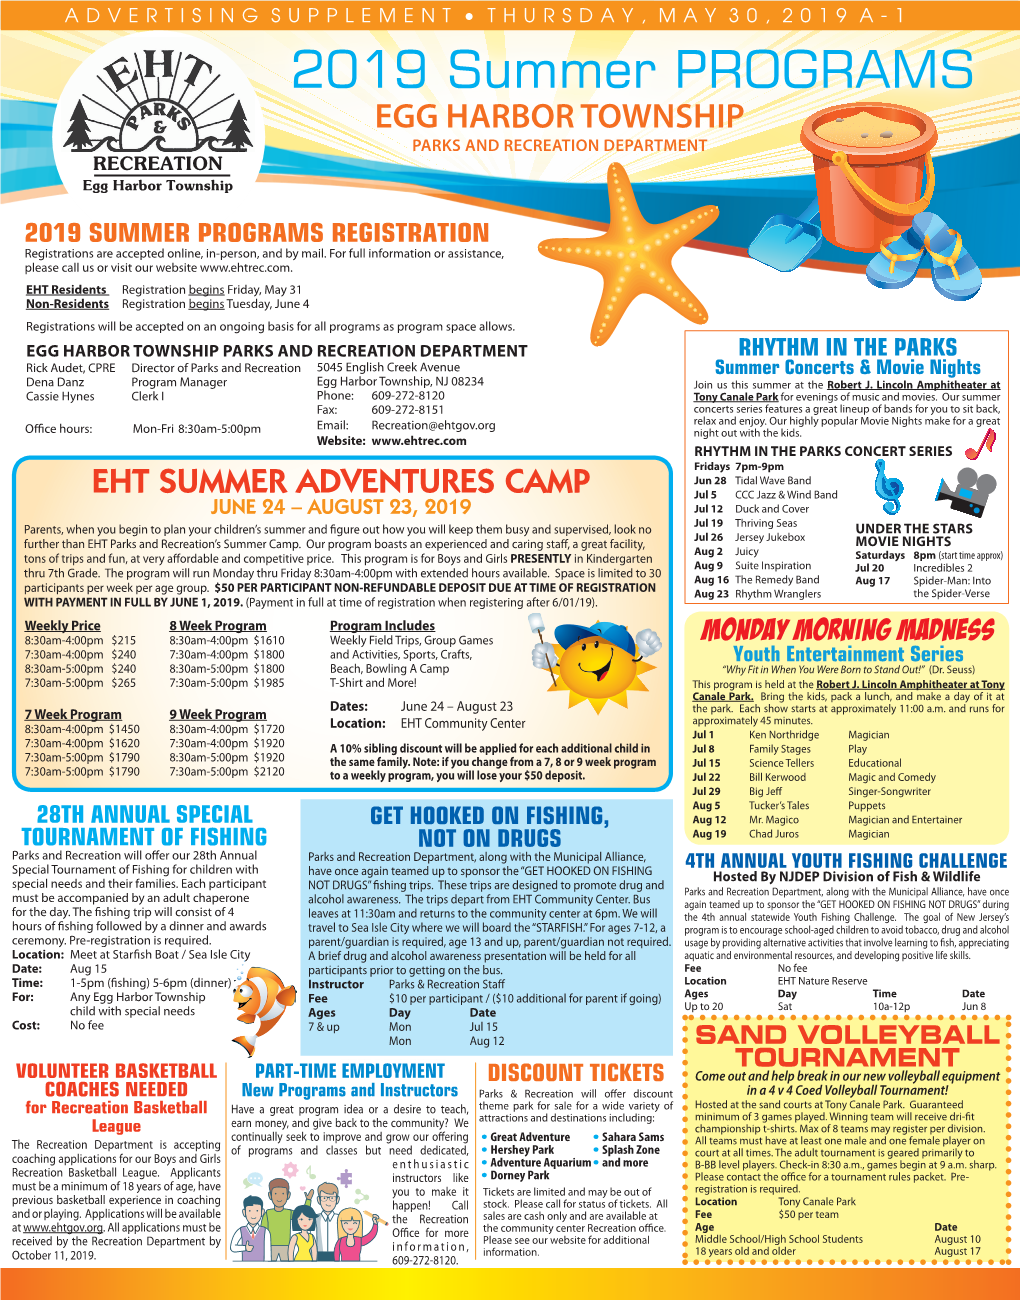 2019 Summer PROGRAMS EGG HARBOR TOWNSHIP PARKS and RECREATION DEPARTMENT RECREATION Egg Harbor Township